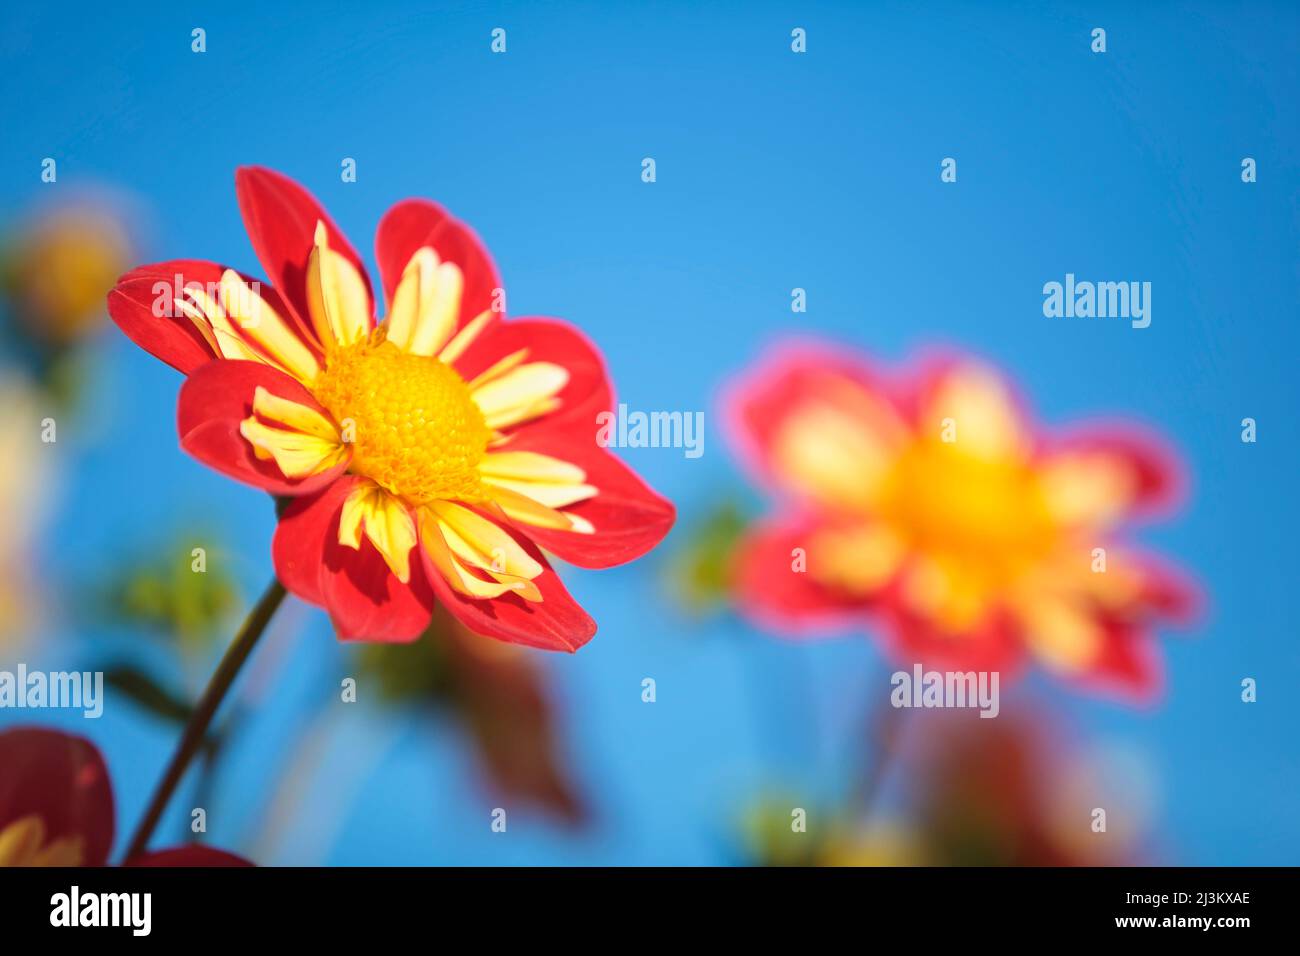 Red and yellow vibrant Dahlia flower in sunlight with blue sky; Canby, Oregon, United States of America Stock Photo